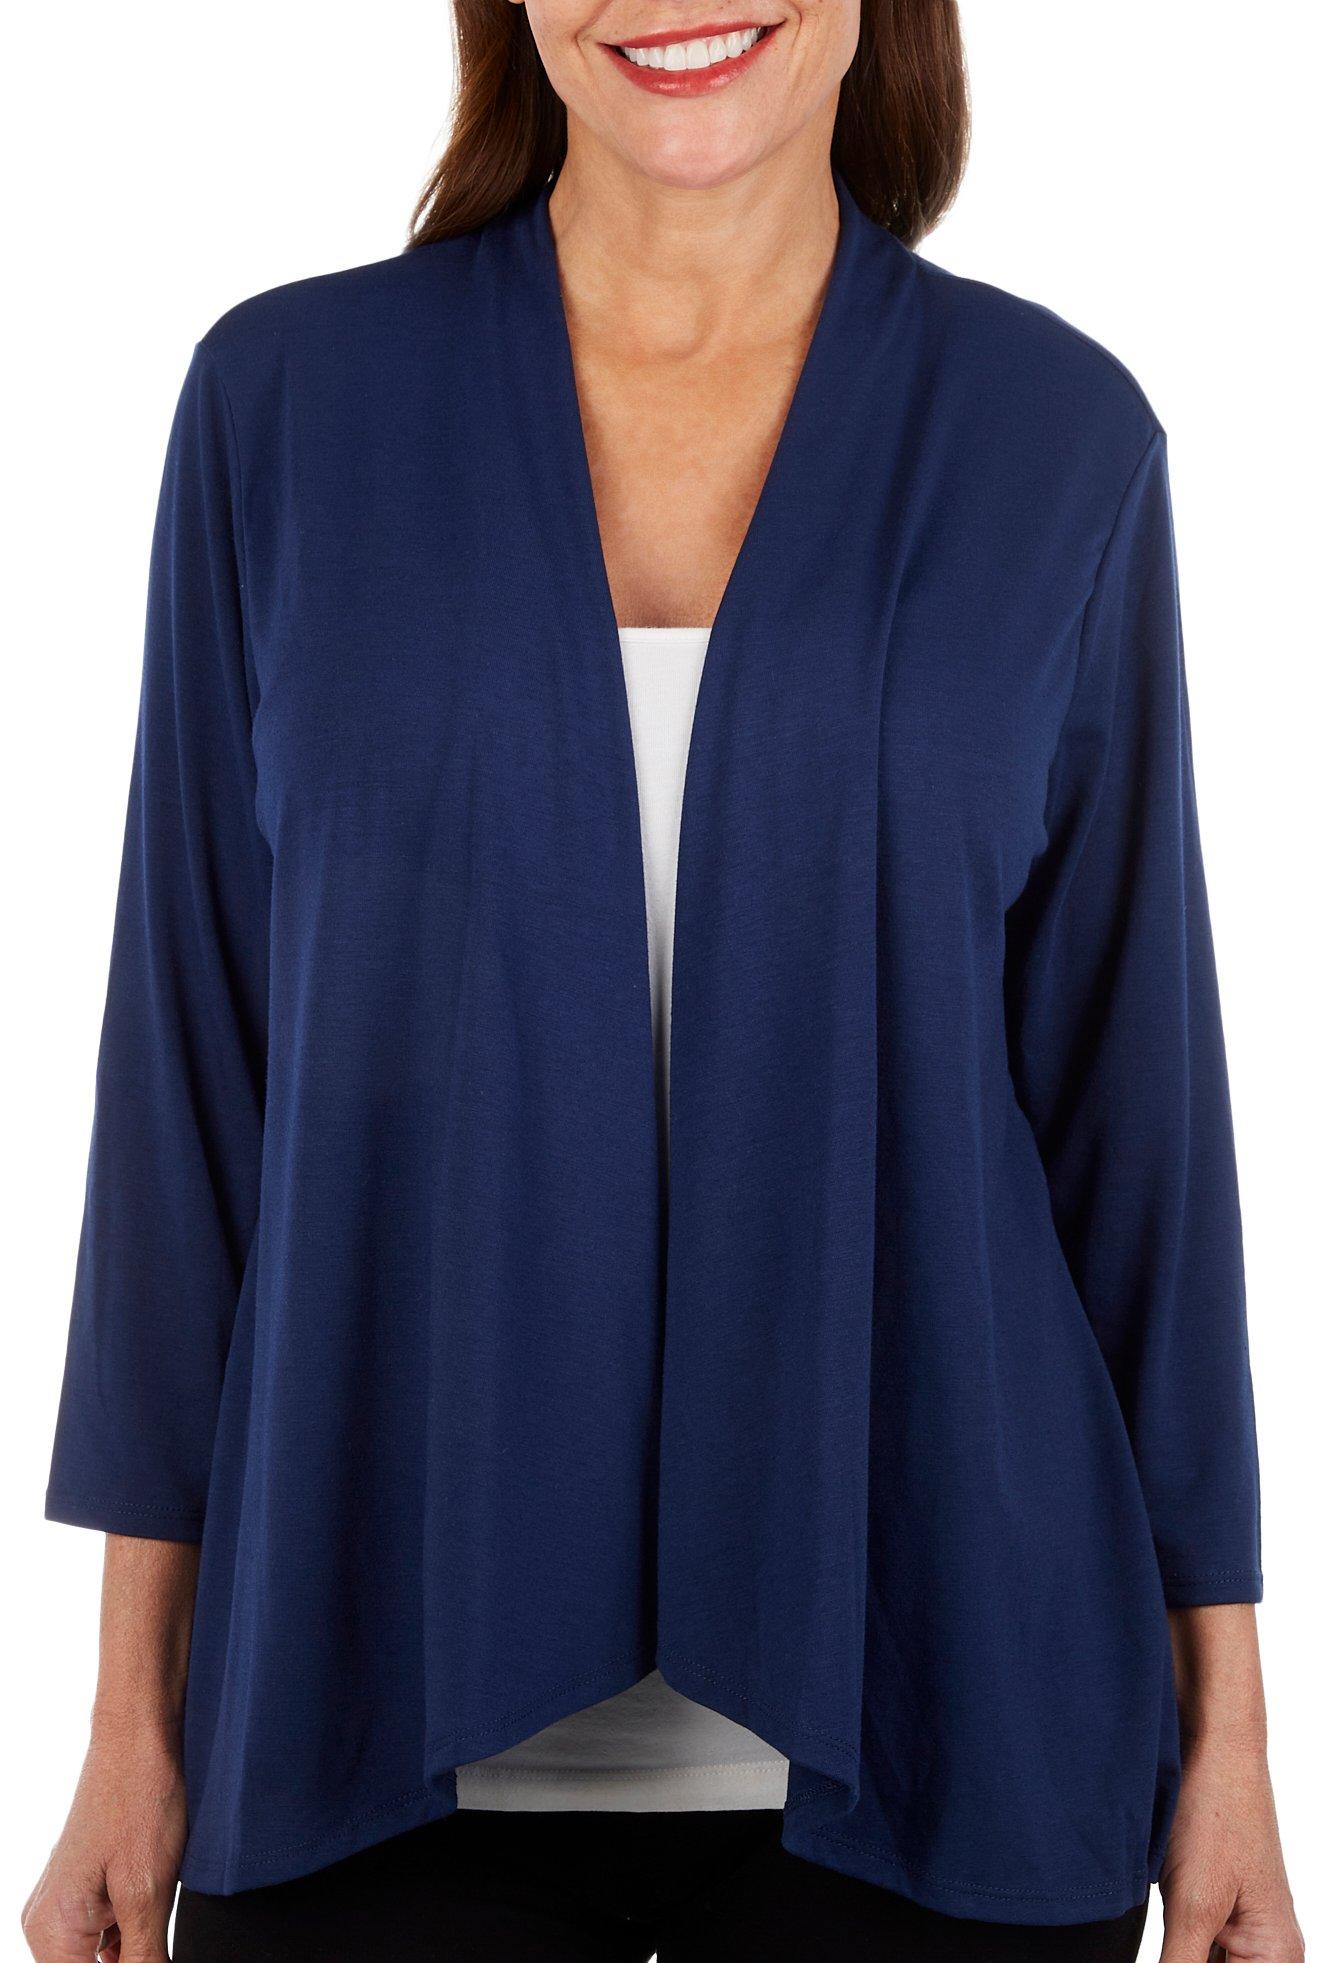 Womens Solid Open Cardigan